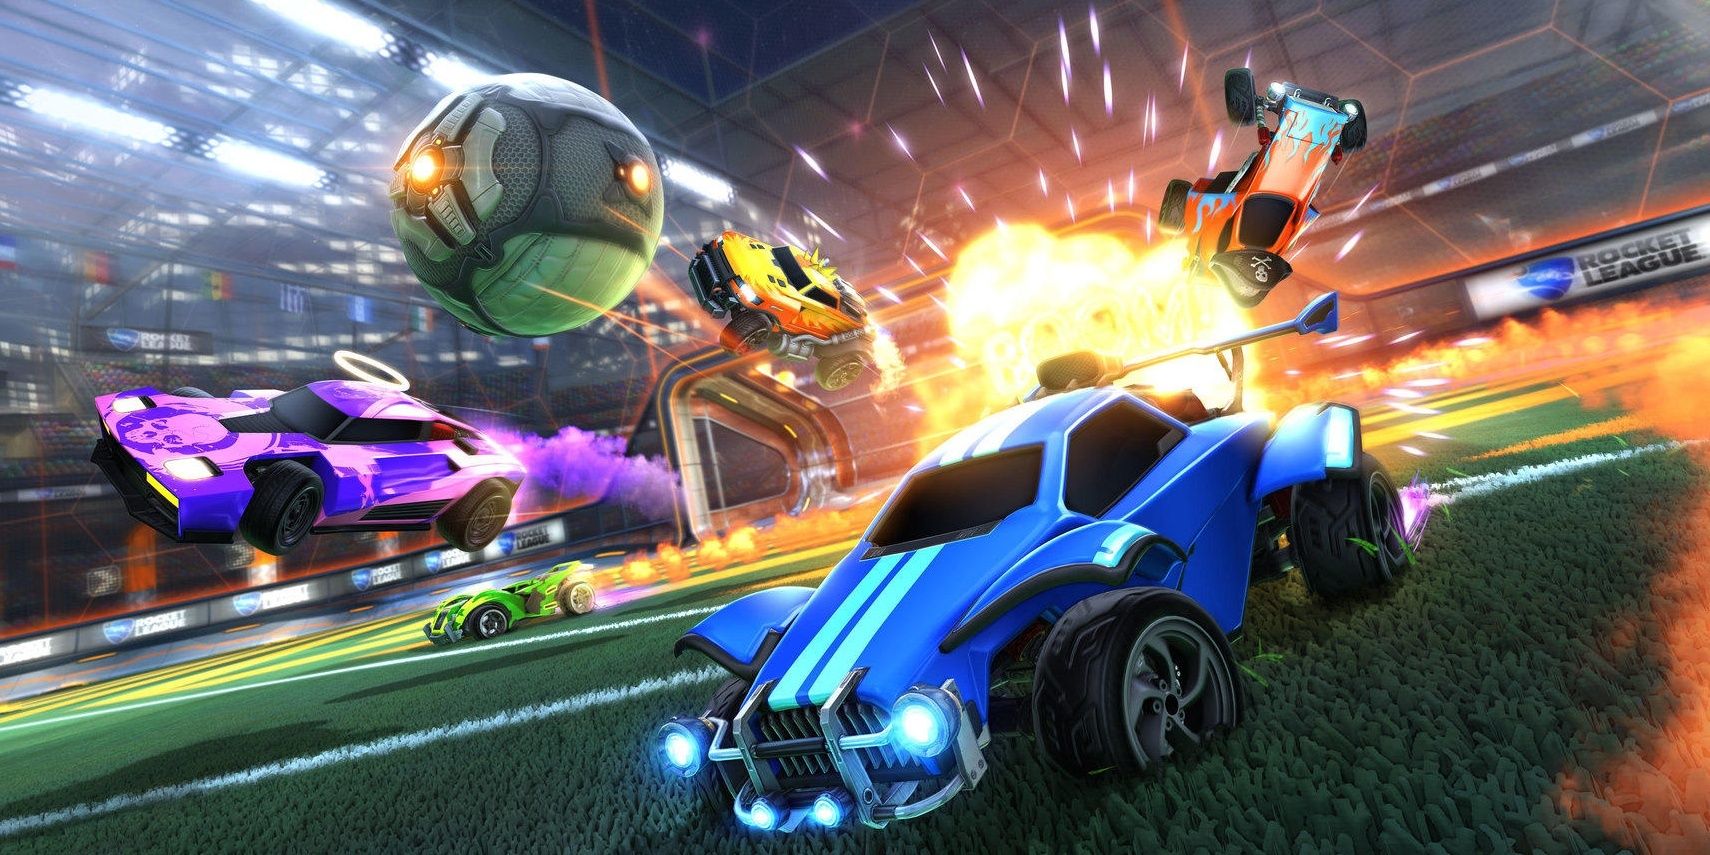 Rocket League Shot of Ball flying through the air with explosion in background and car in foreground